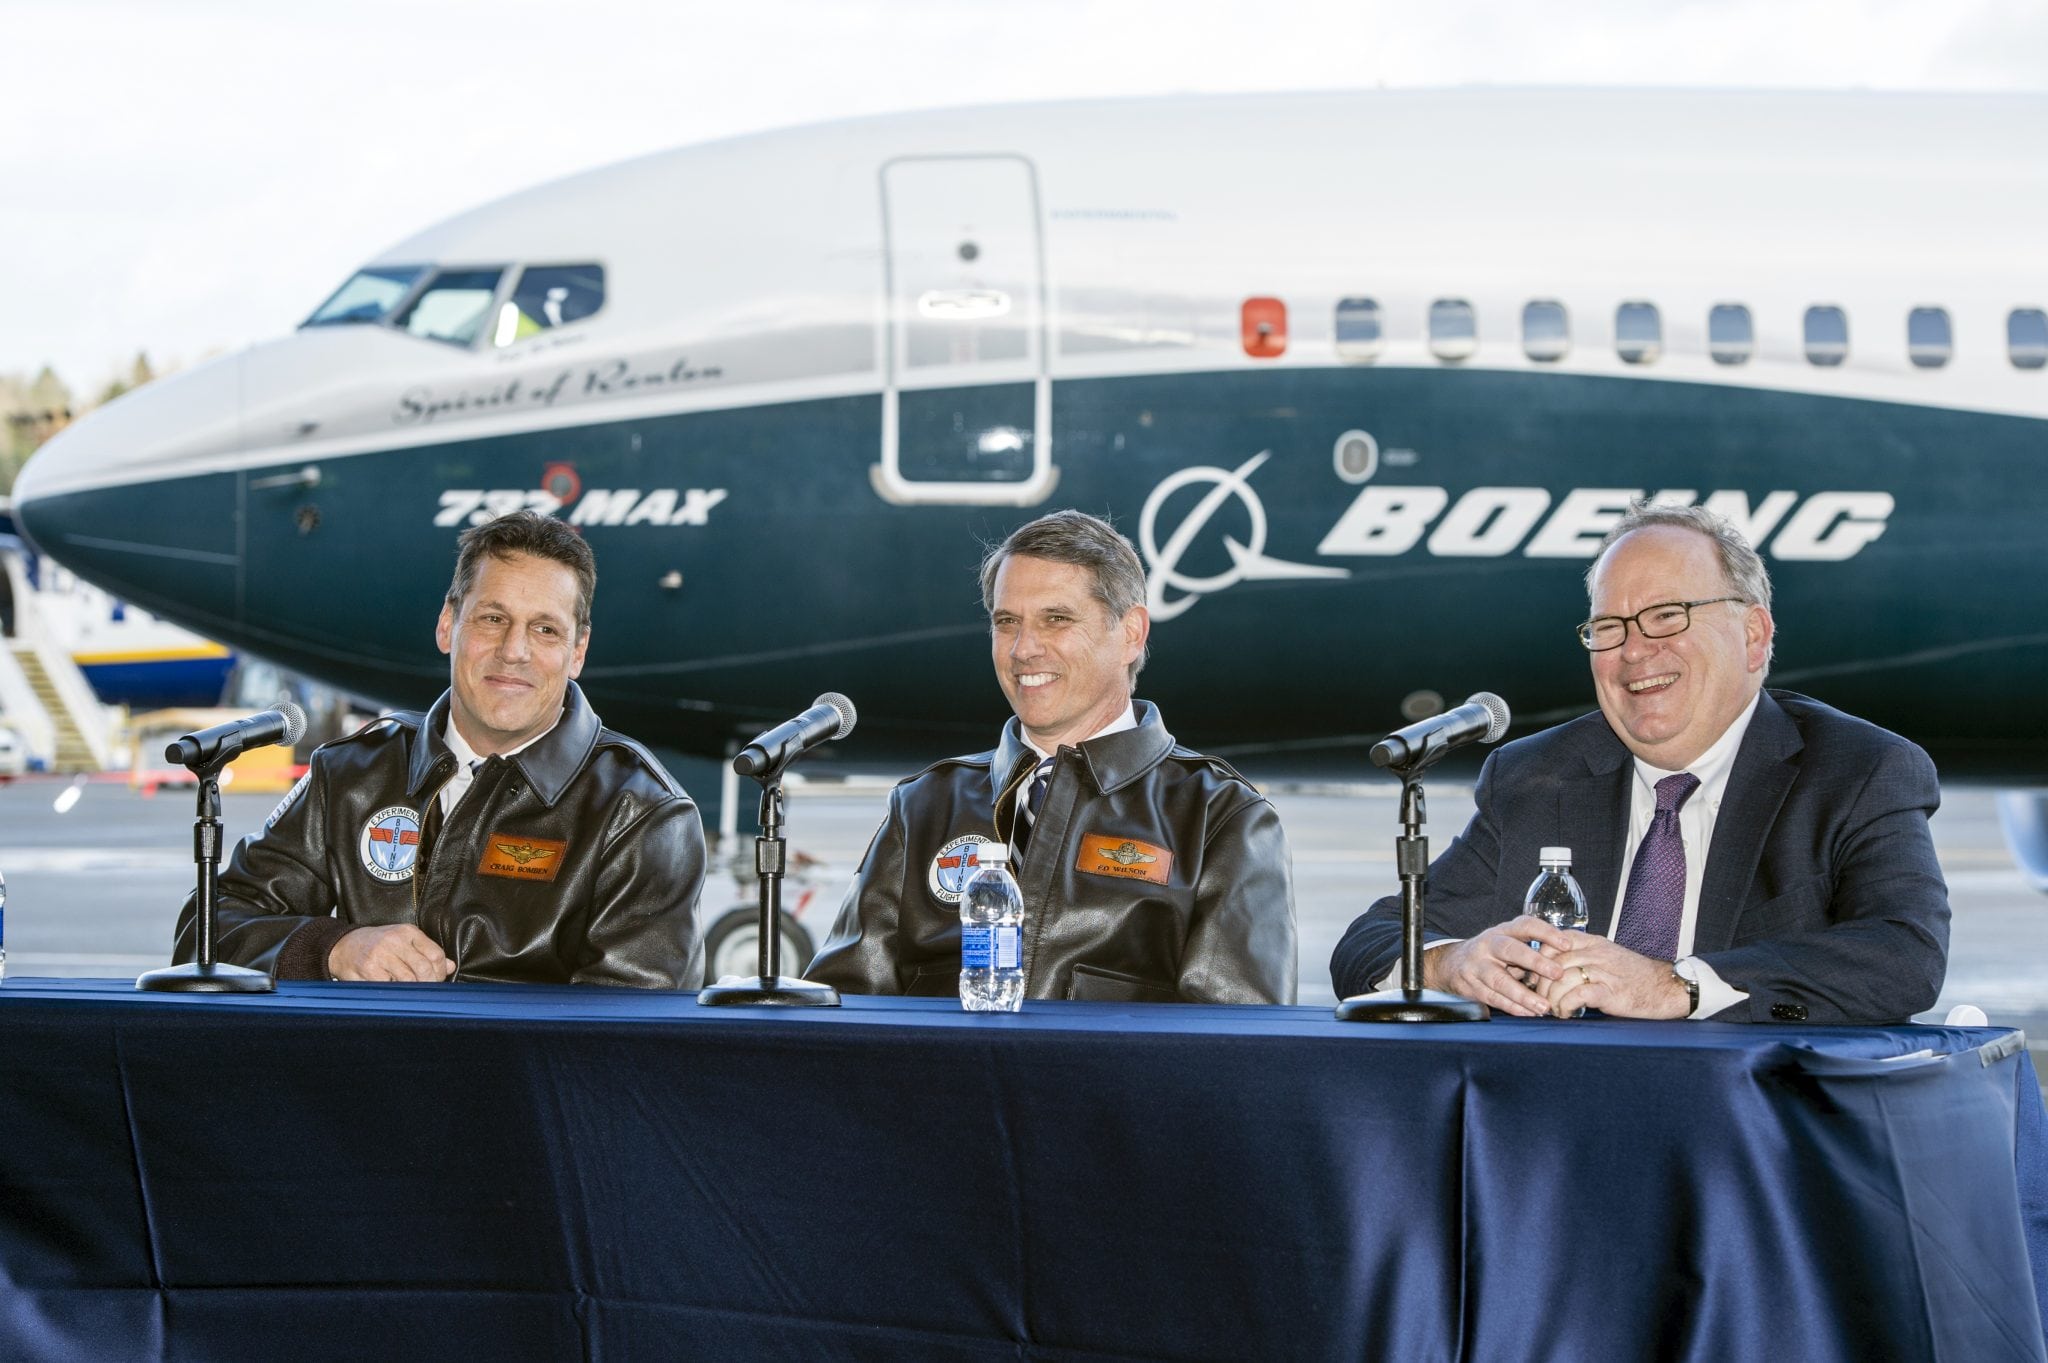 Following the successful first flight of the 737 MAX, (L-R) Boeing Chief Test Pilot and Vice President of Flight Operations Craig Bomben, 737 MAX Chief Pilot Ed Wilson and Keith Leverkuhn, vice president and general manager, 737 MAX program briefed news media